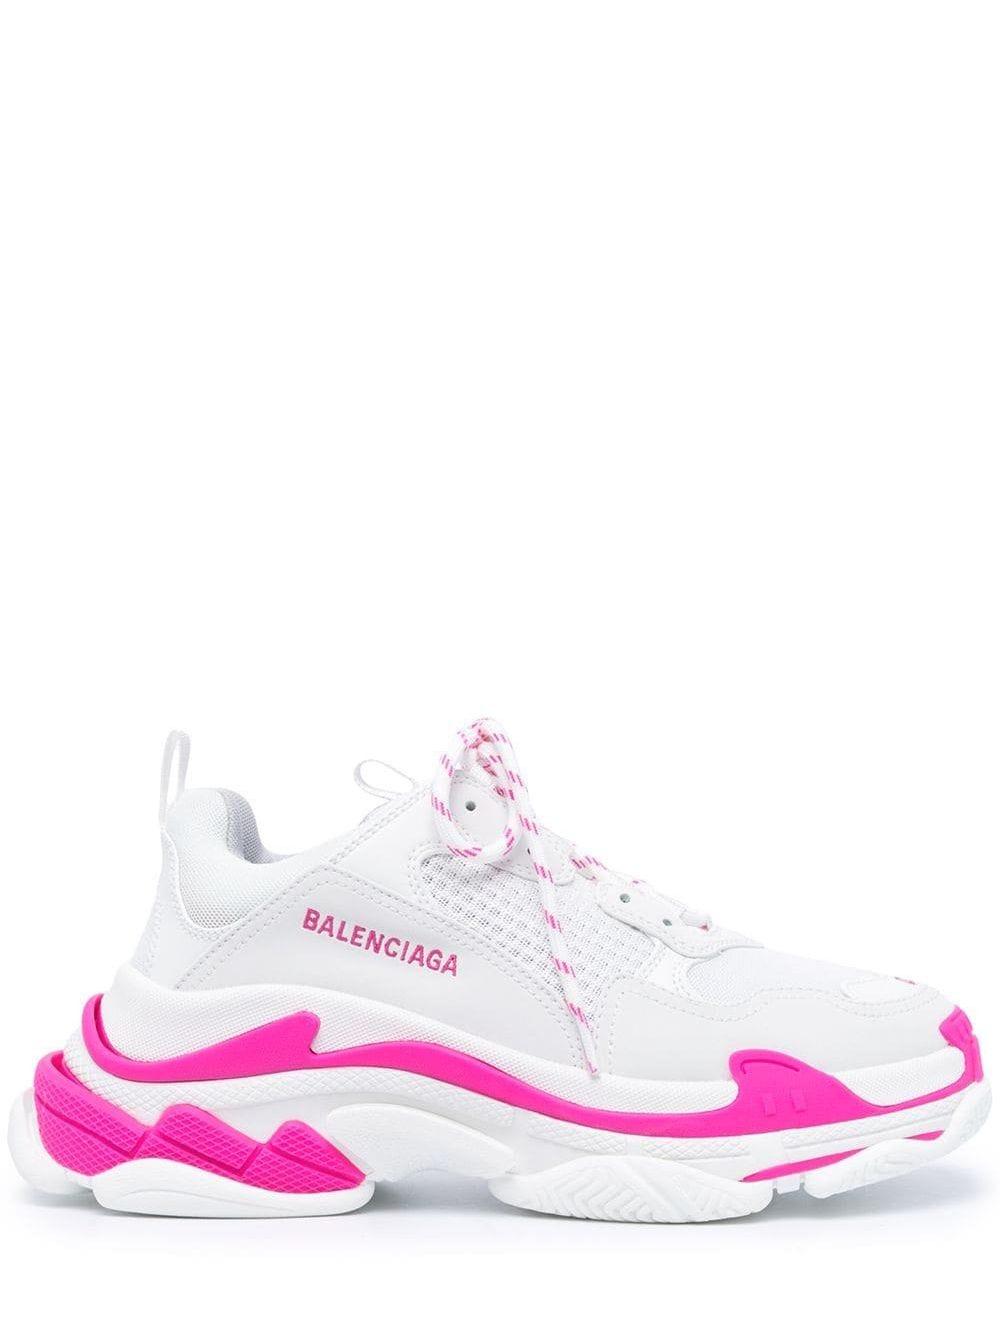 Balenciaga White And Pink Triple S Sneakers - Save 56% | Lyst